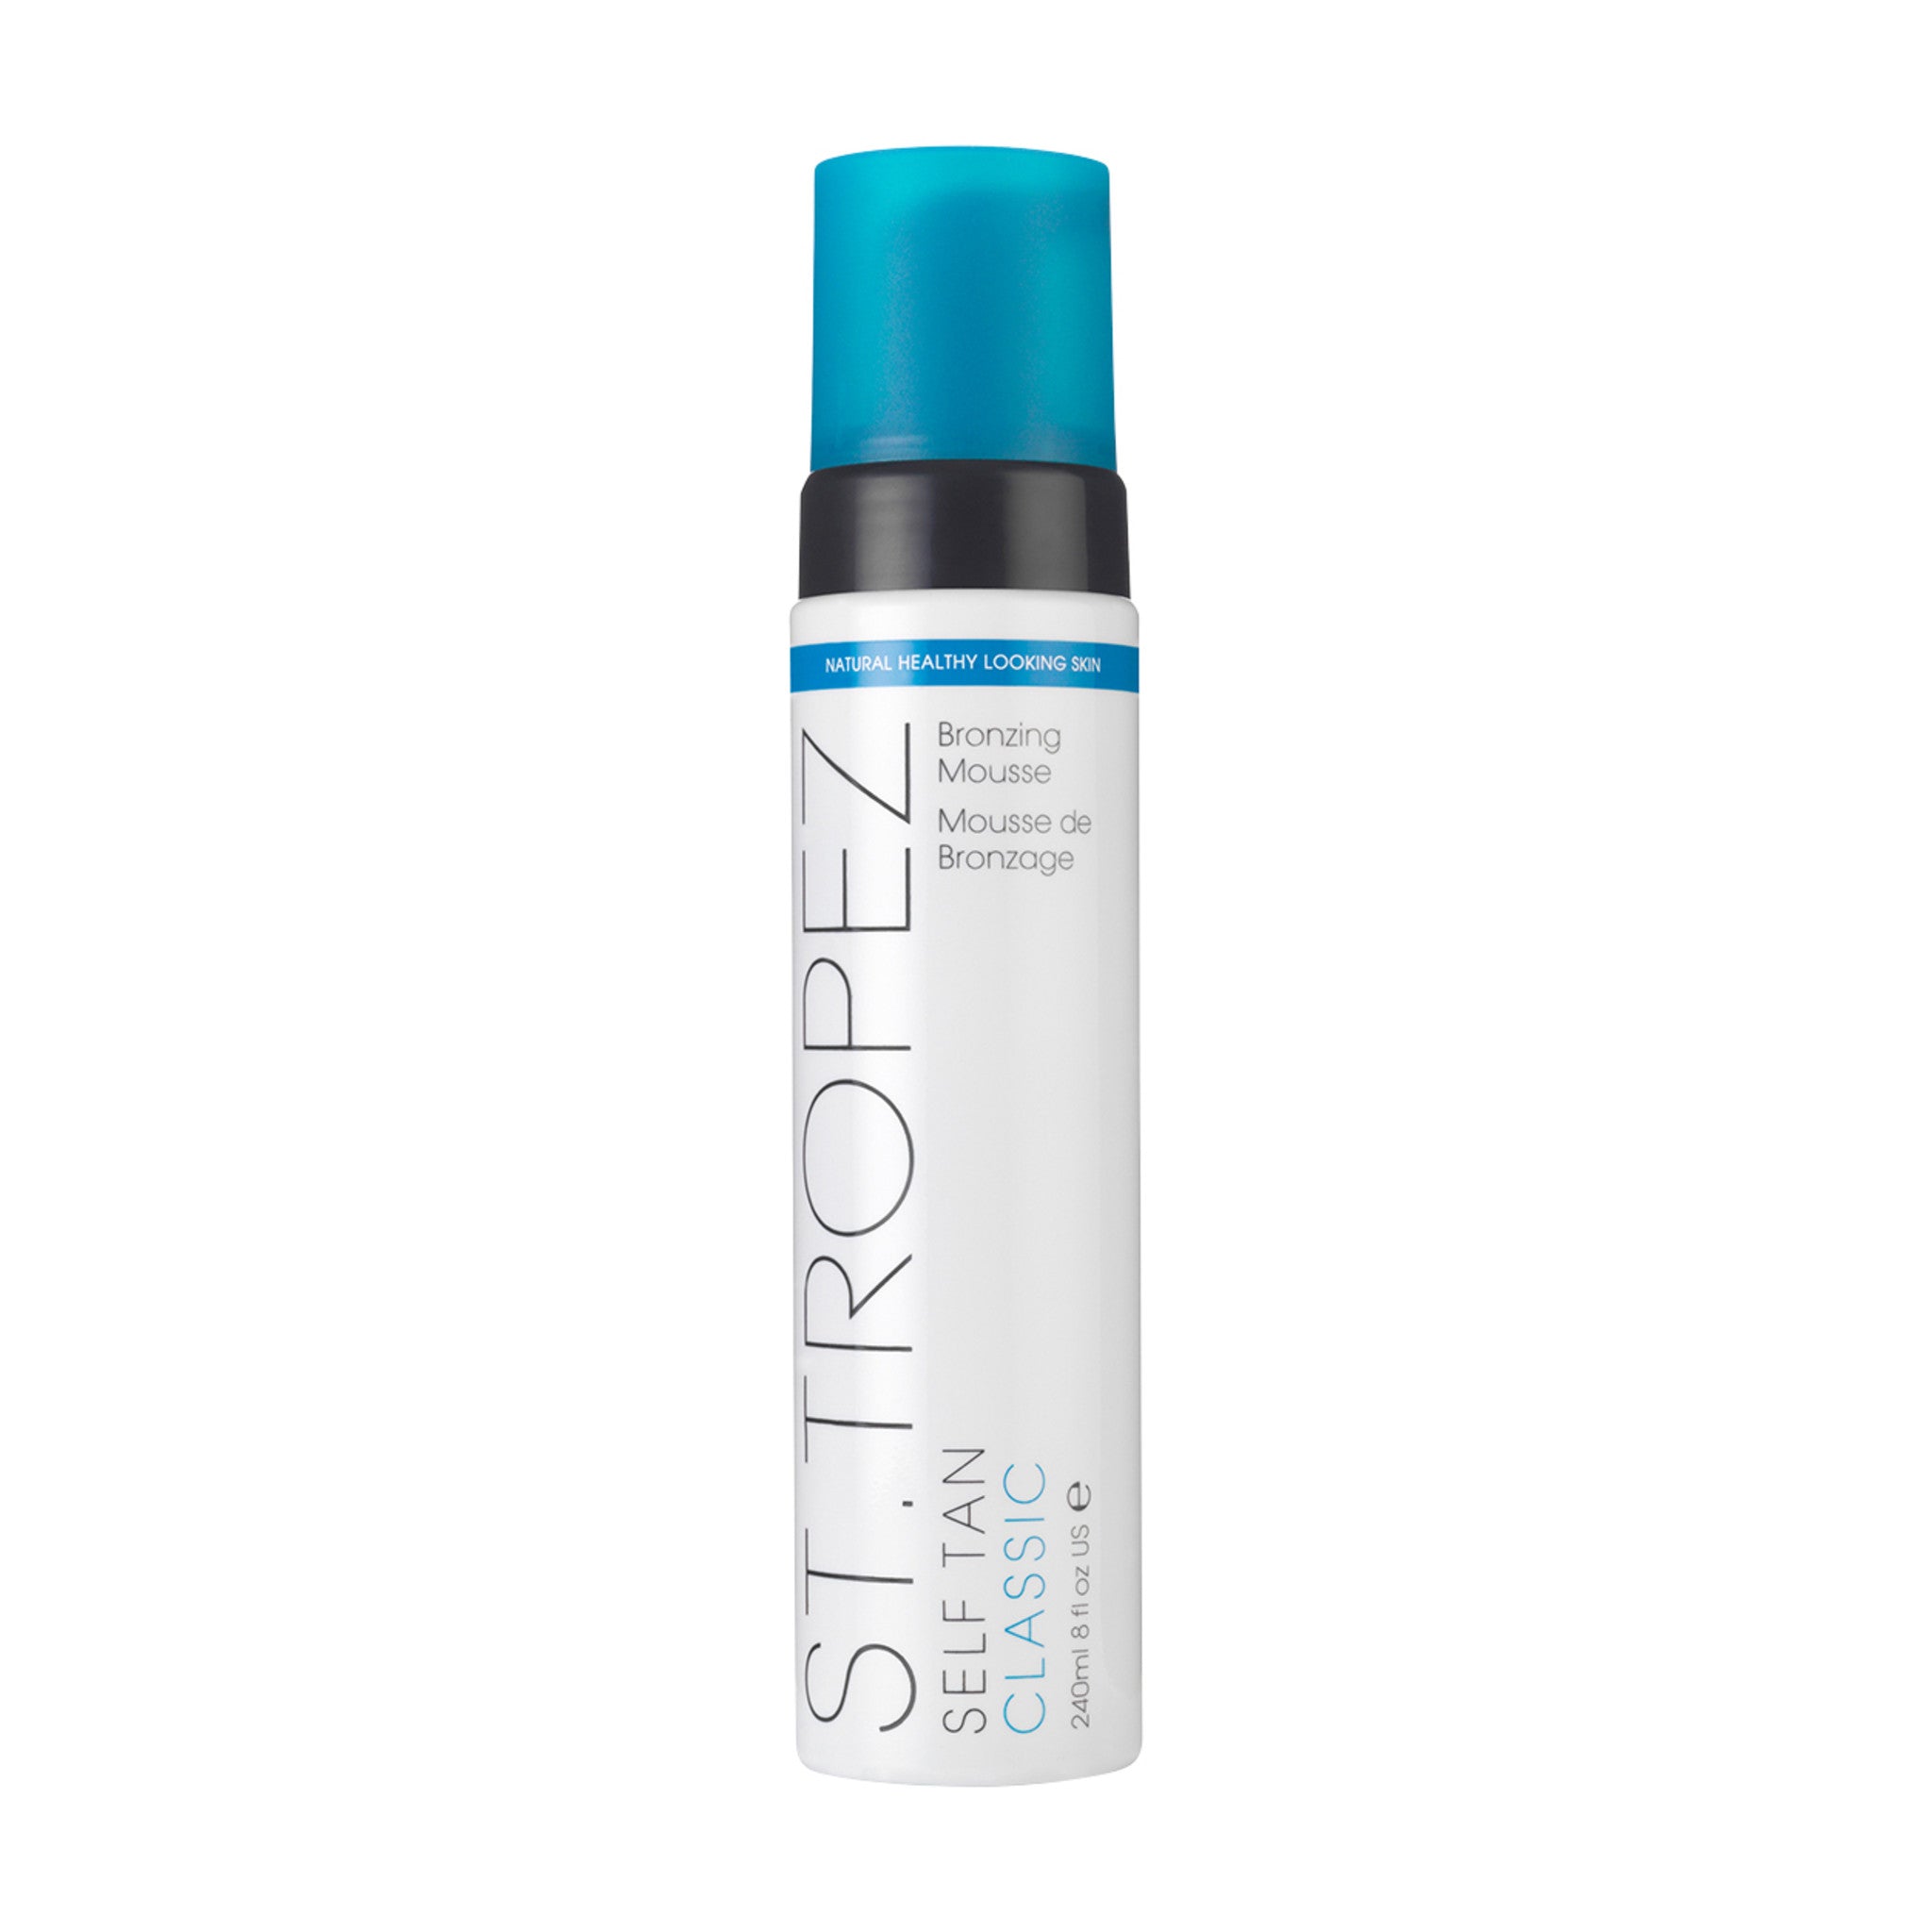 St. Tropez Self Tan Bronzing Mousse Size variant: 8.0 oz main image. This product is for deep complexions